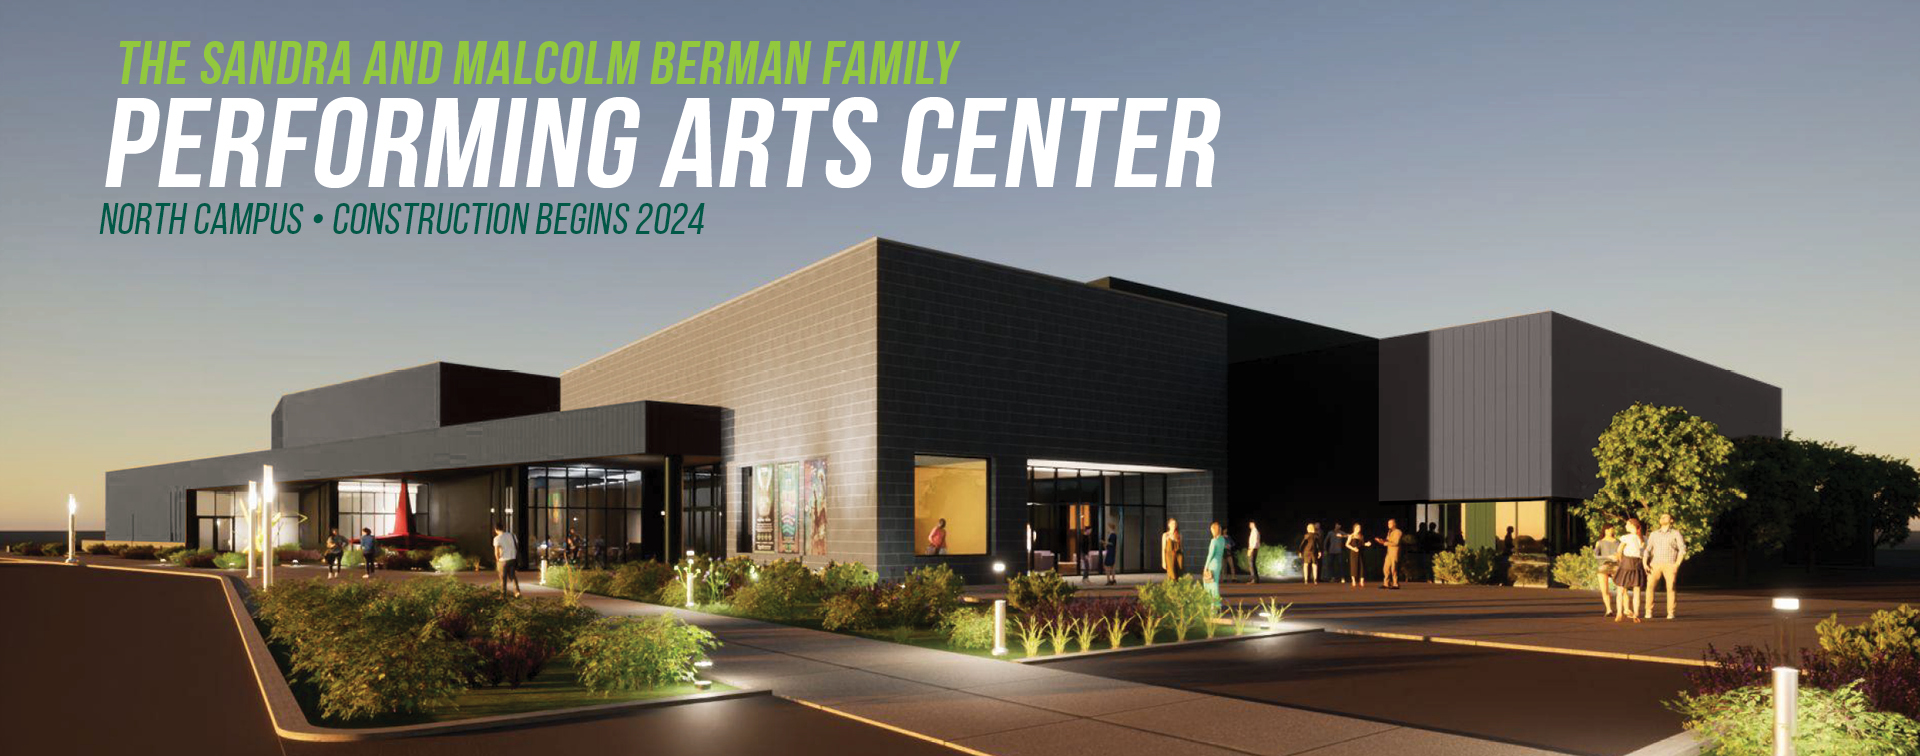 The New Performing Arts Center